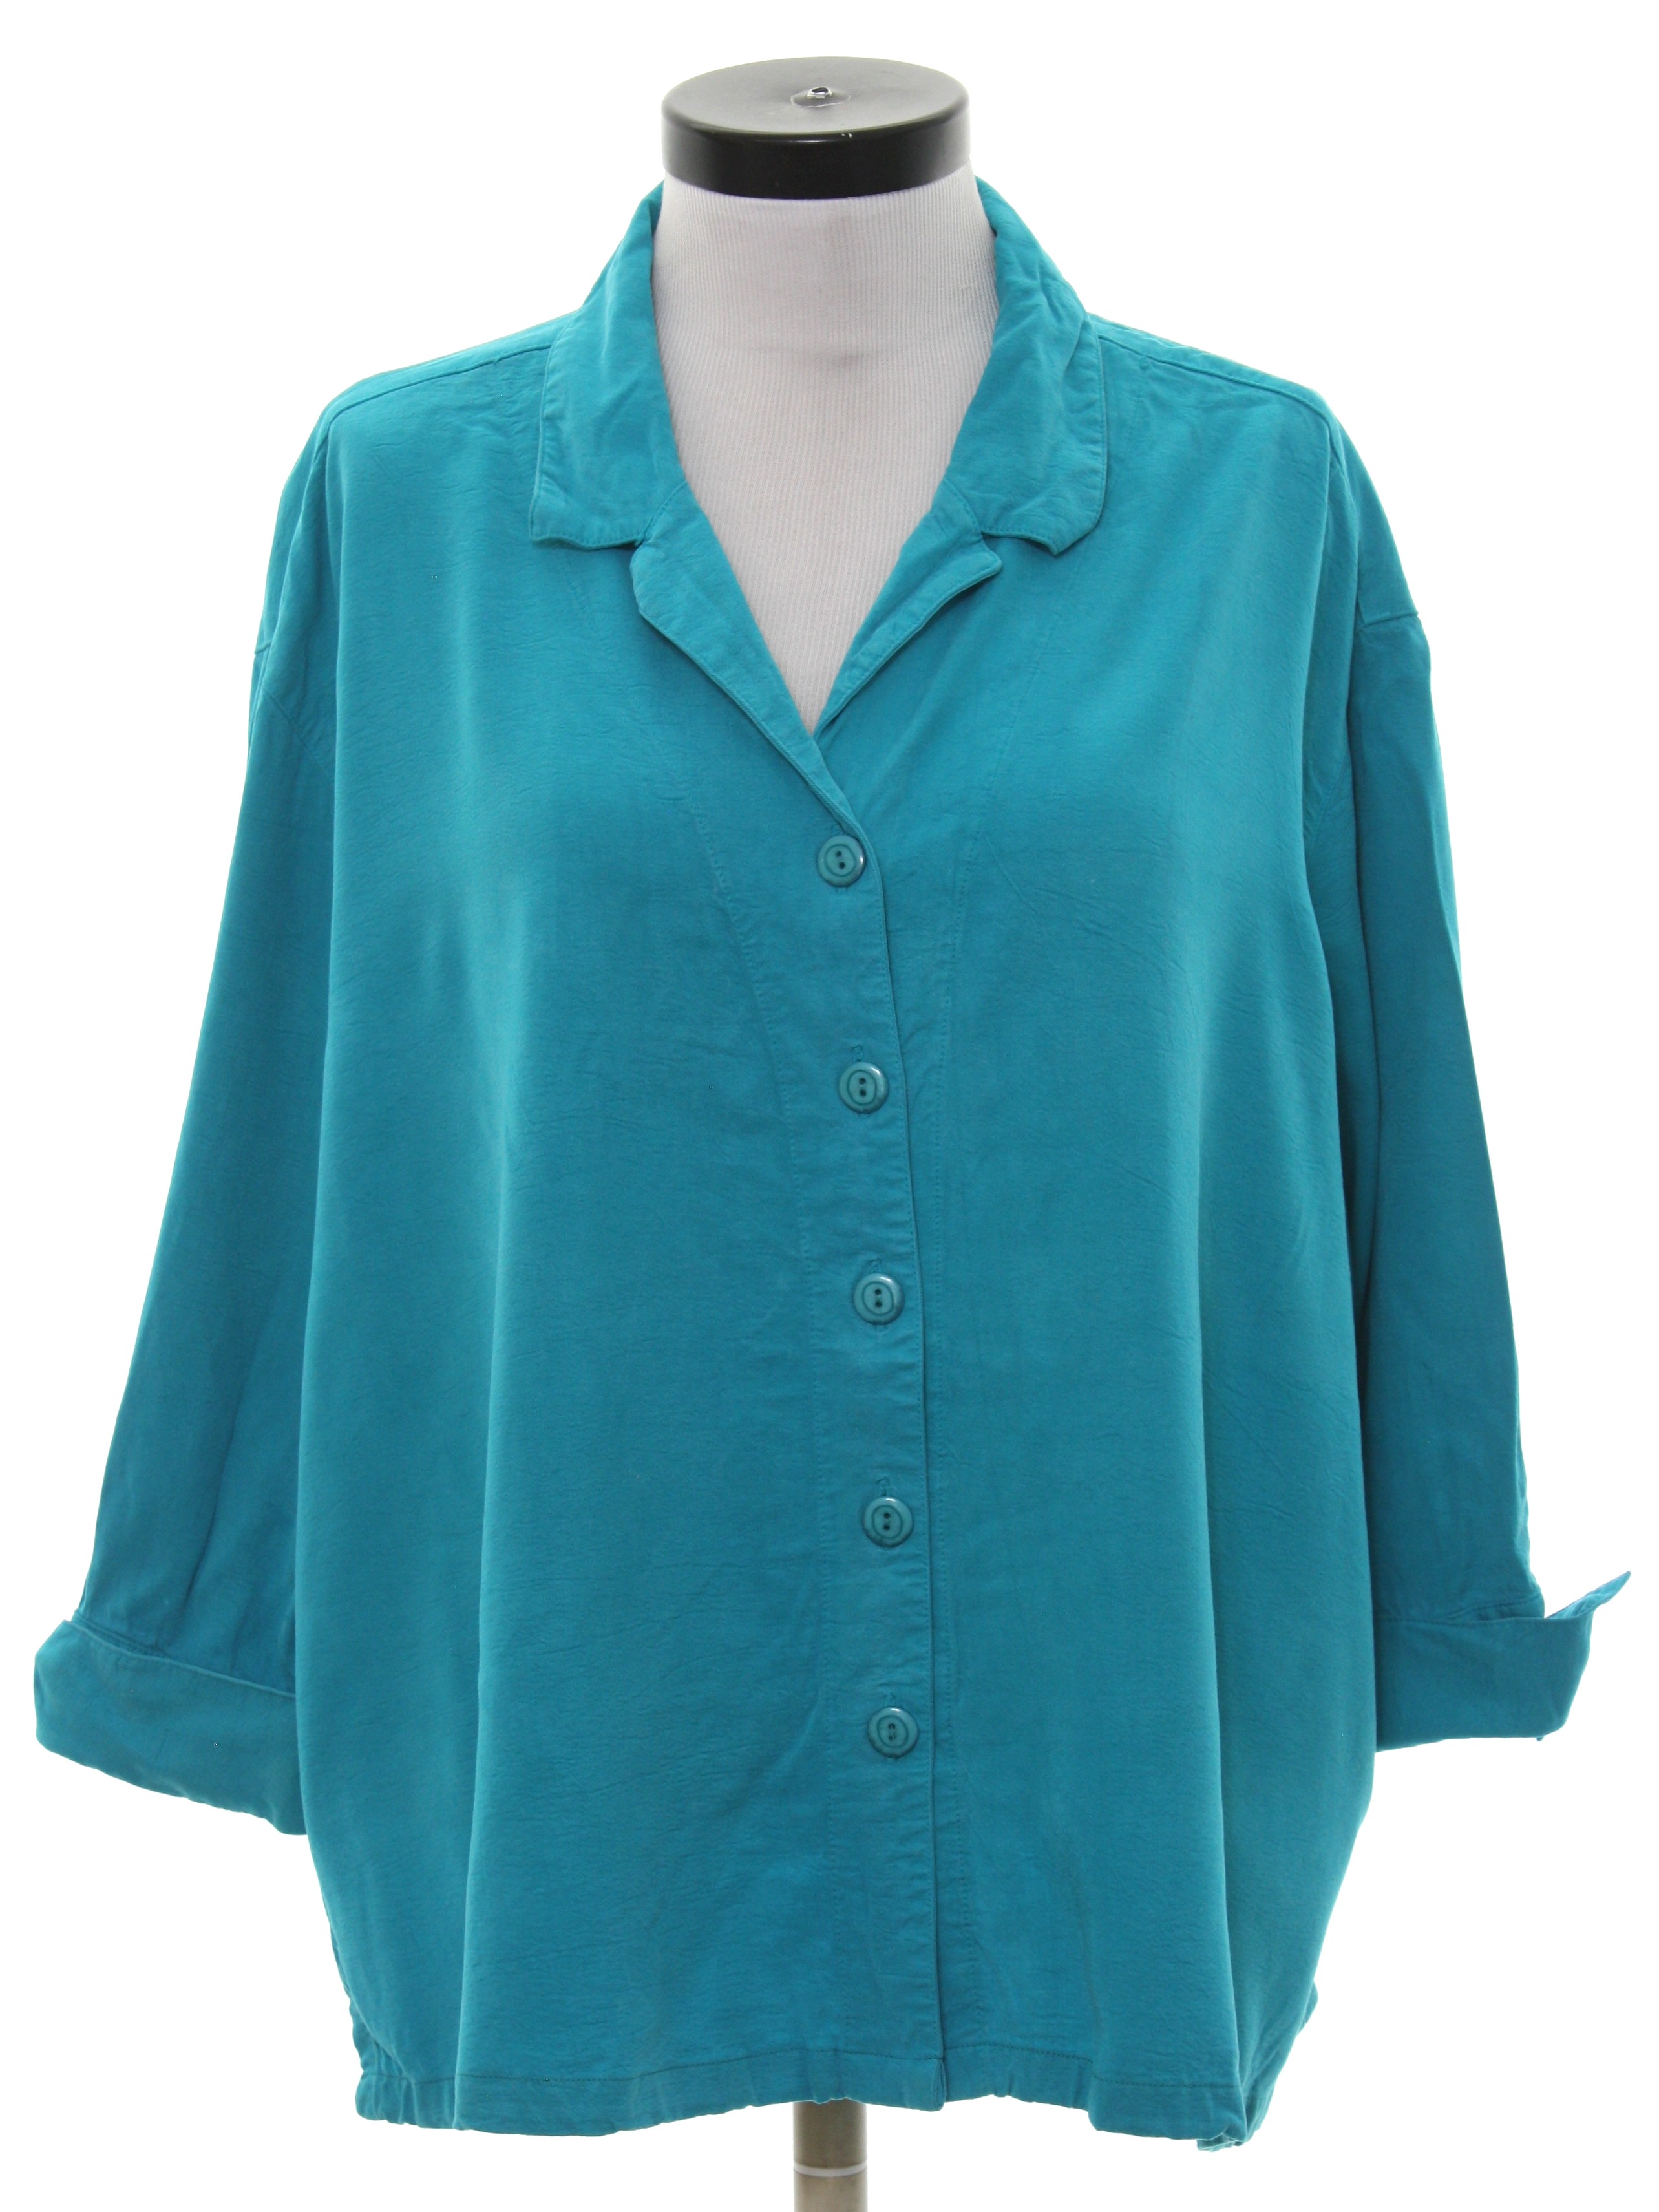 Vintage 1980's Shirt: 80s -Tianello- Womens teal background rayon blend ...